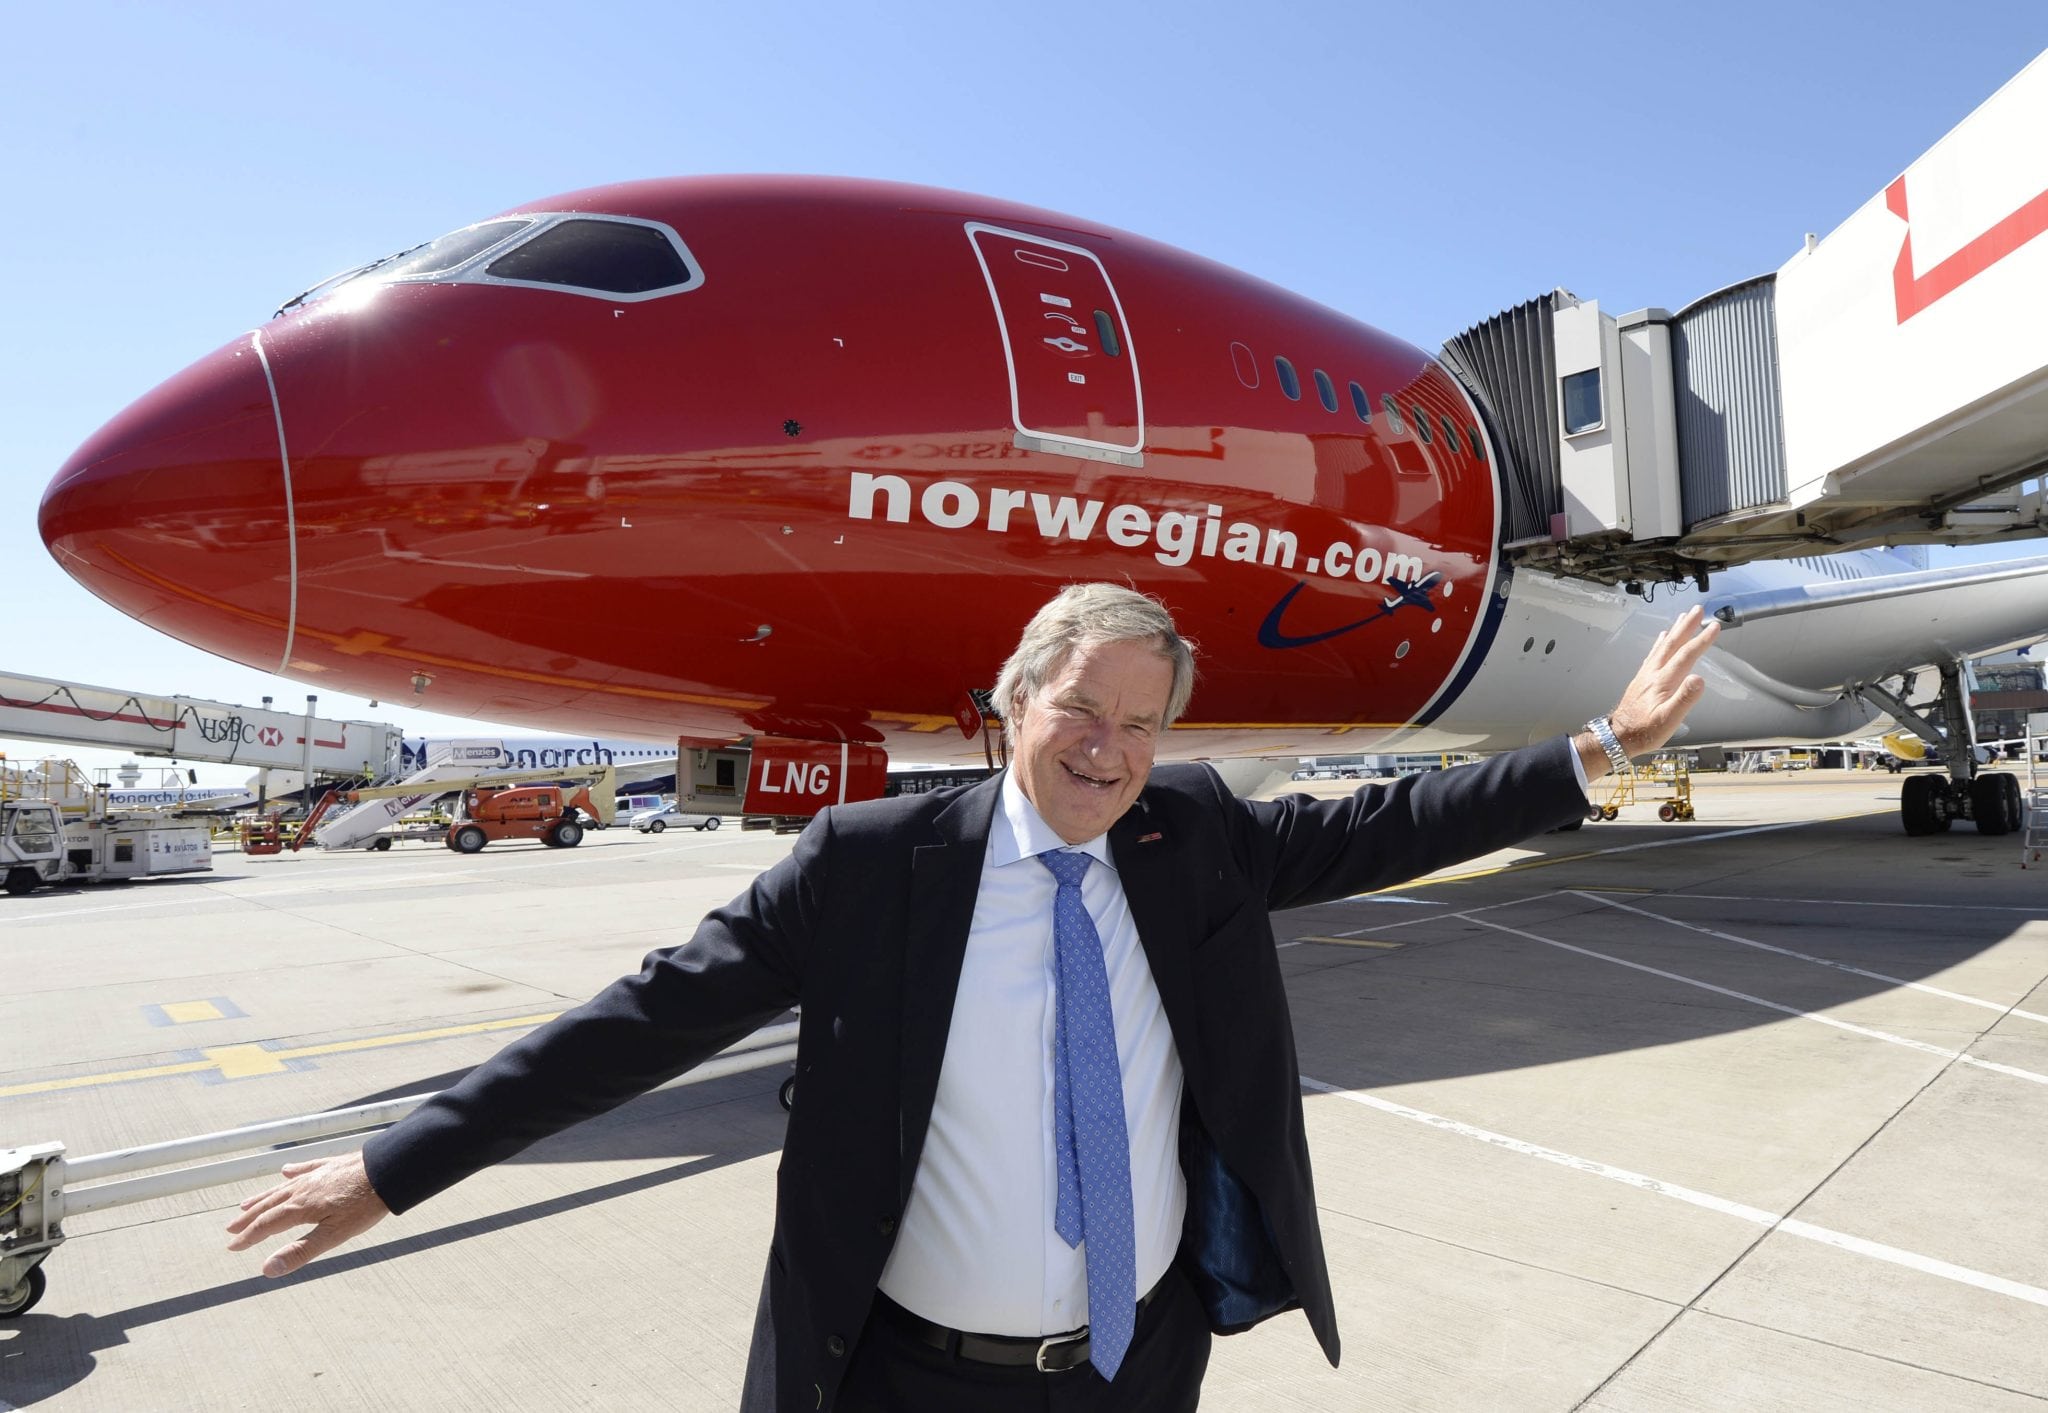 Norwegian Air CEO Bjørn Kjos said his airline's low cost, long haul model would not work without the Boeing 787. "We couldn't get the figures to add up," with any other plane, he said.